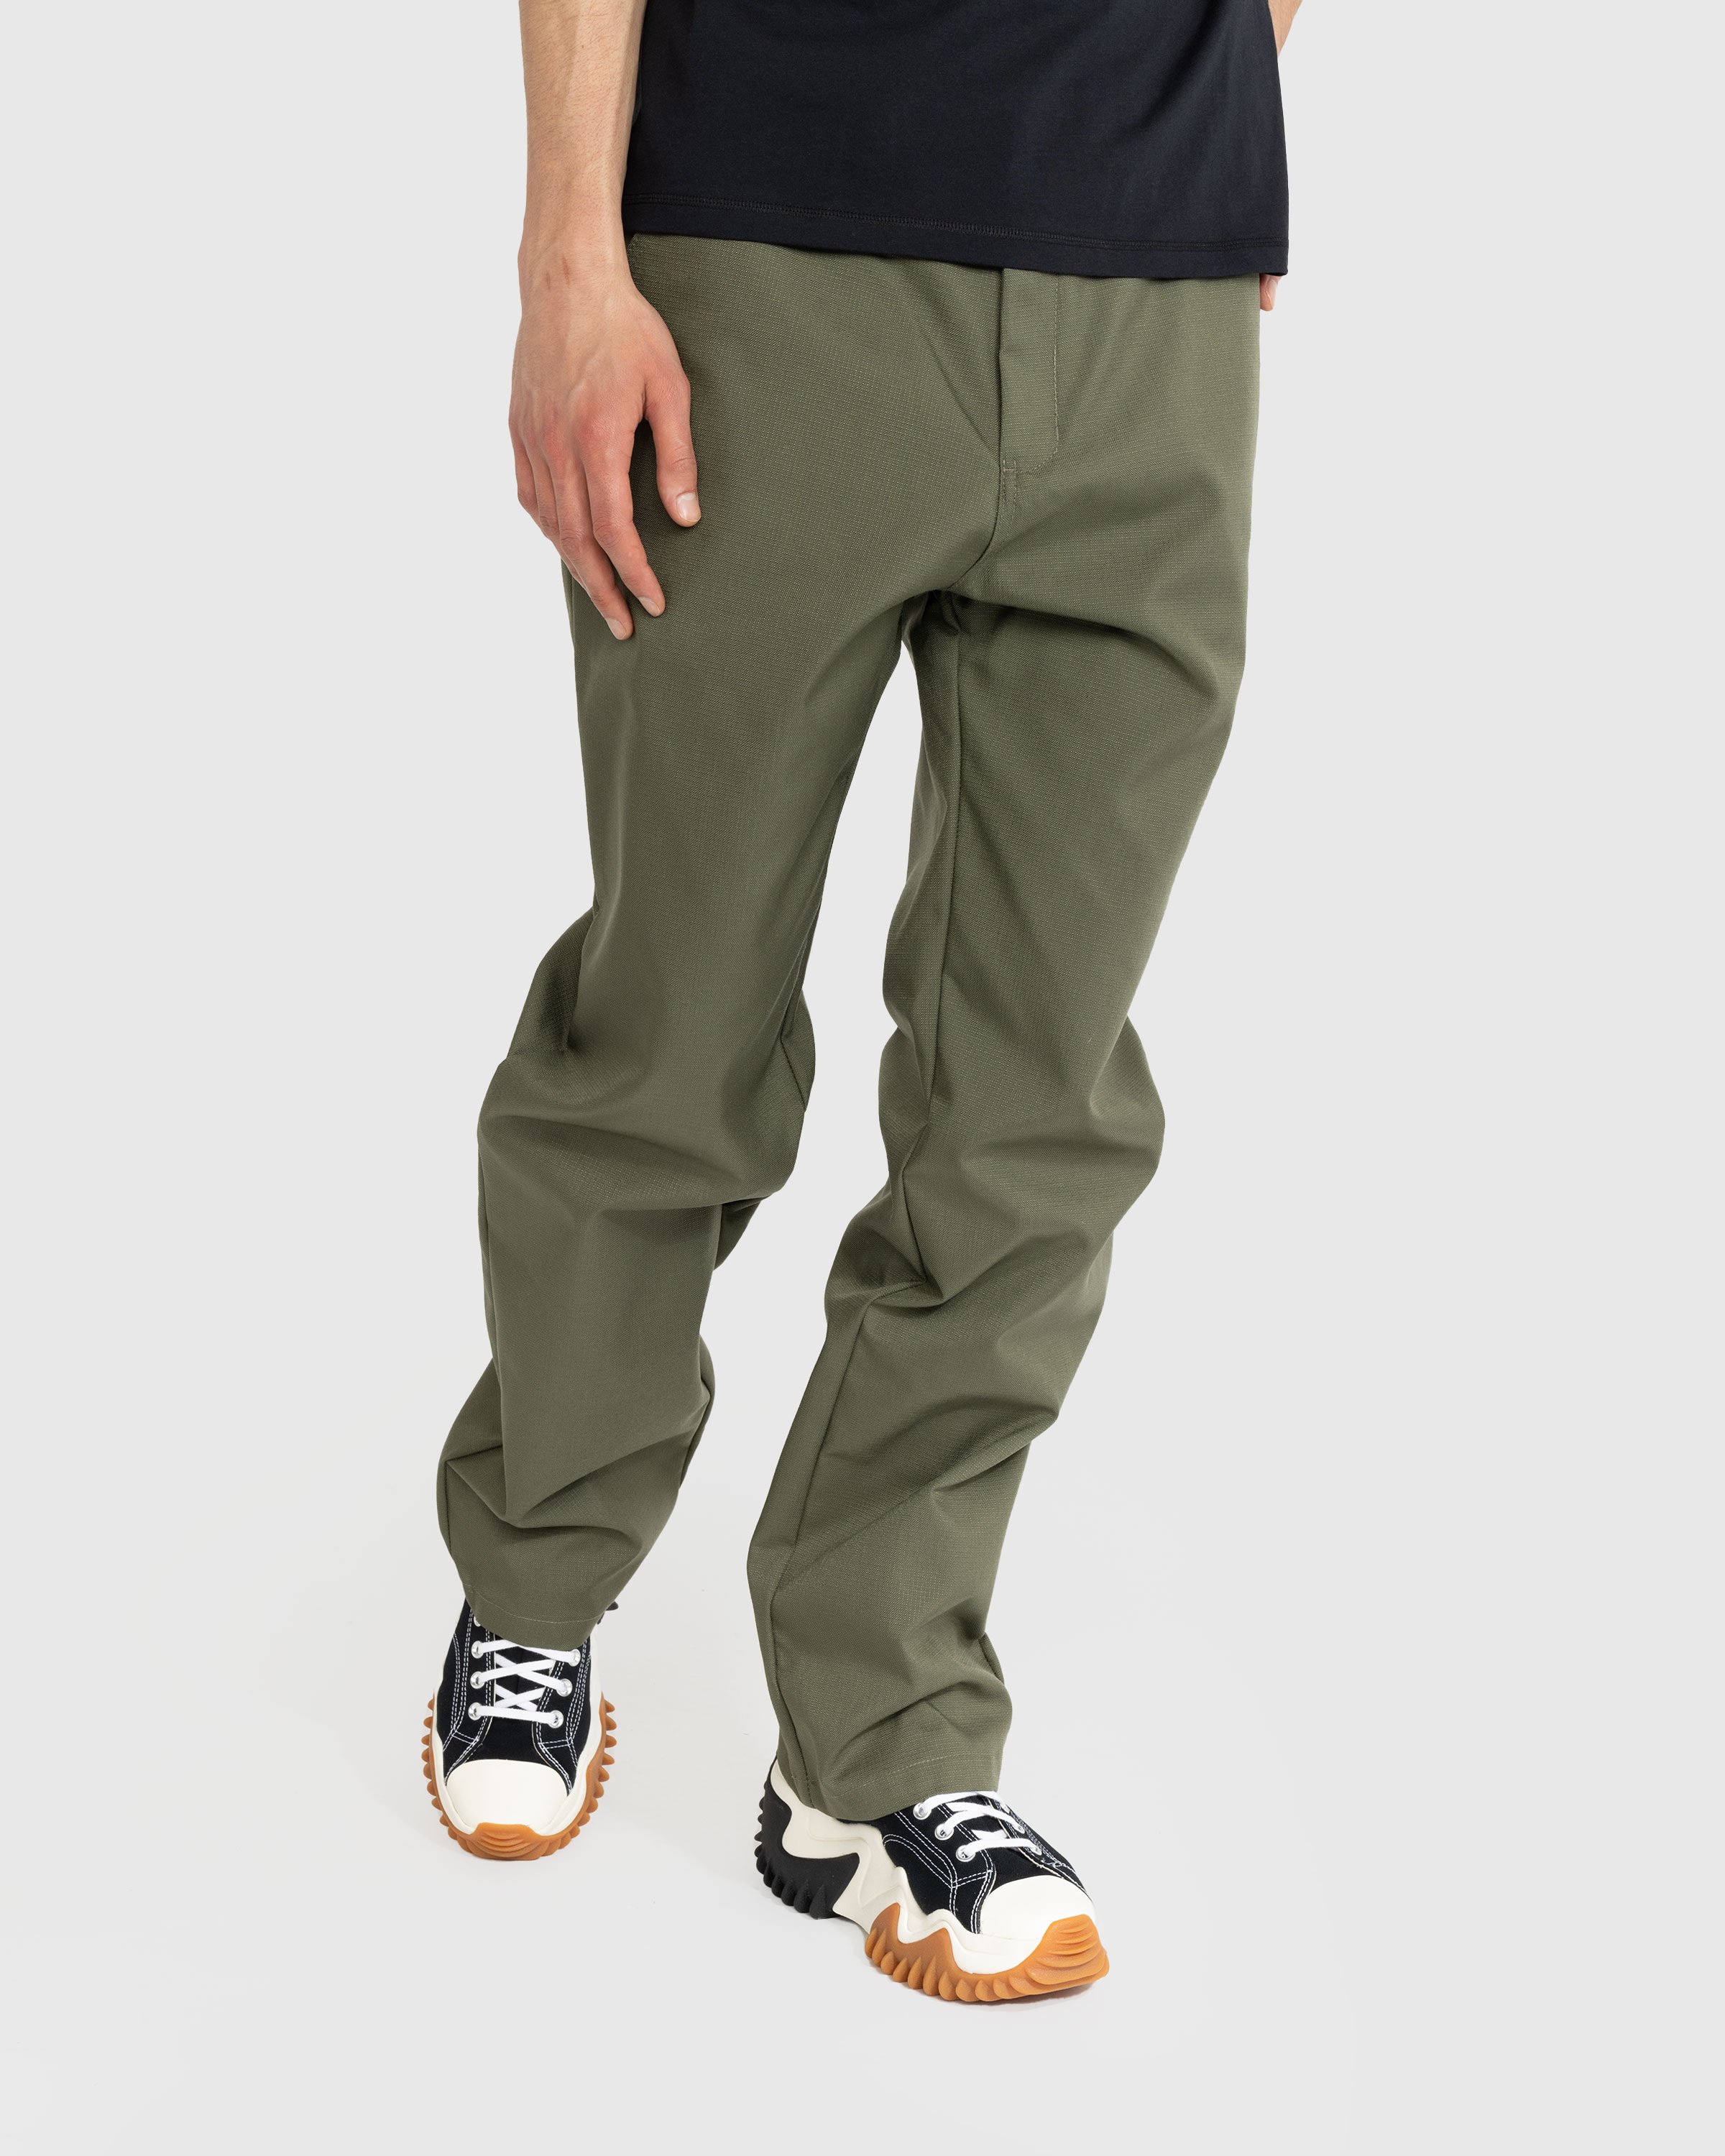 AFFXWRKS - Duty Pant Green - Clothing - Green - Image 2